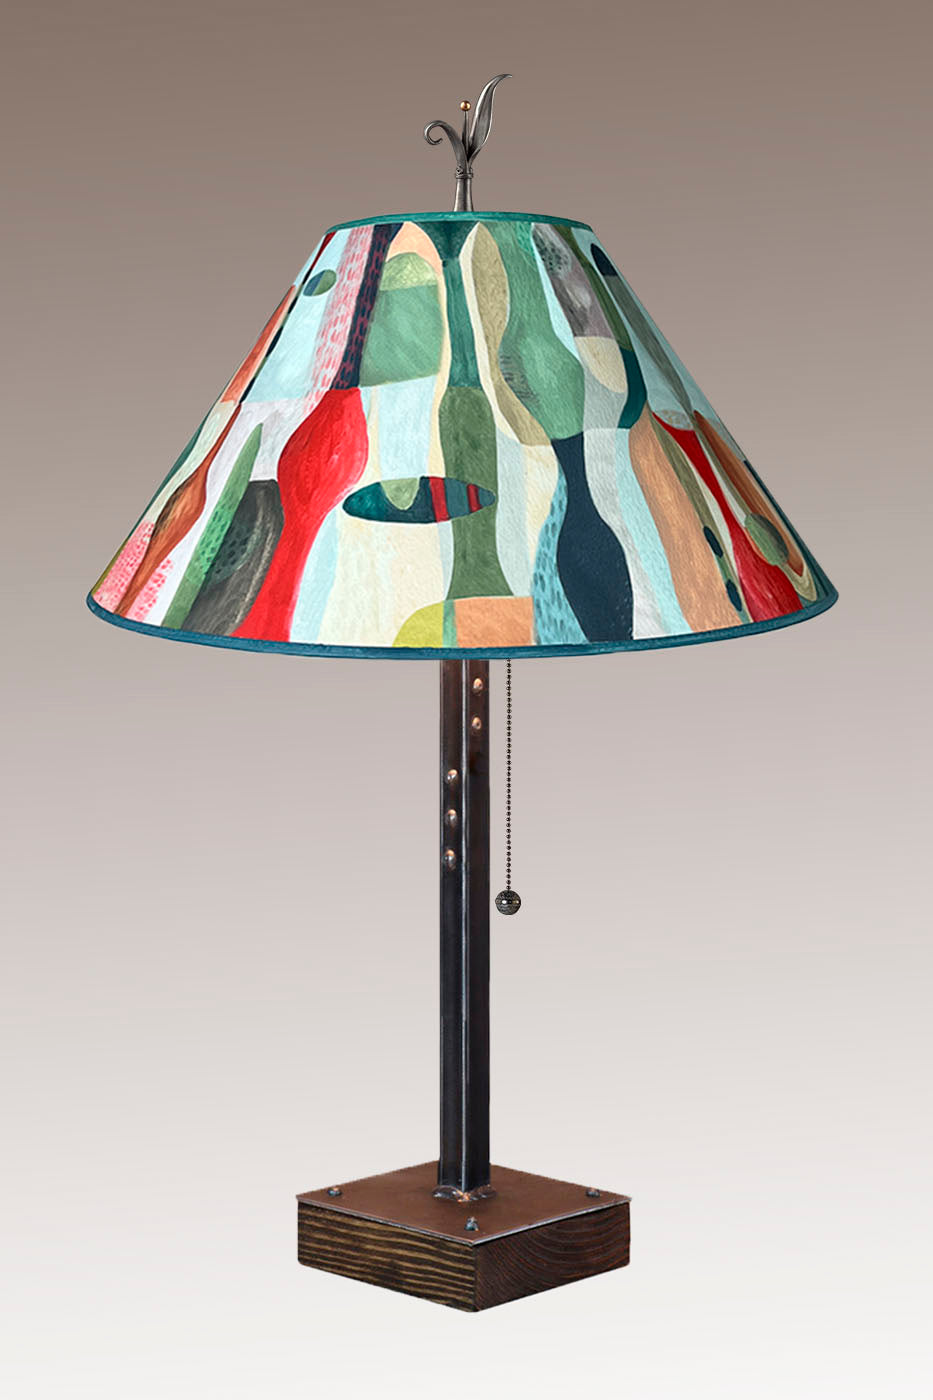 Steel Table Lamp on Wood with Large Conical Shade in Riviera in Poppy